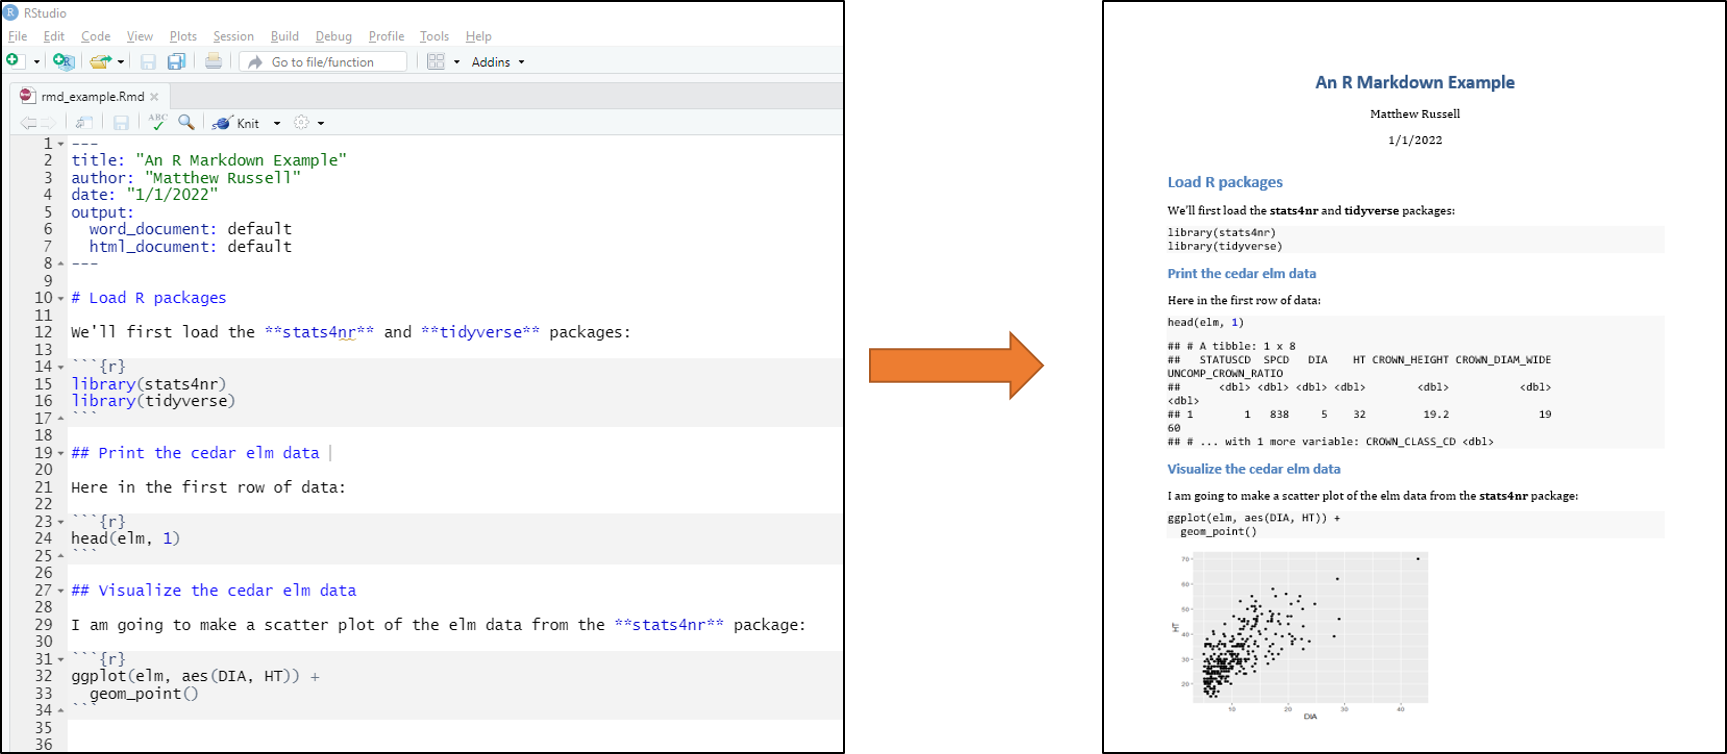 Example R Markdown code from RStudio (left) that can be knit into a document in Microsoft Word (right).